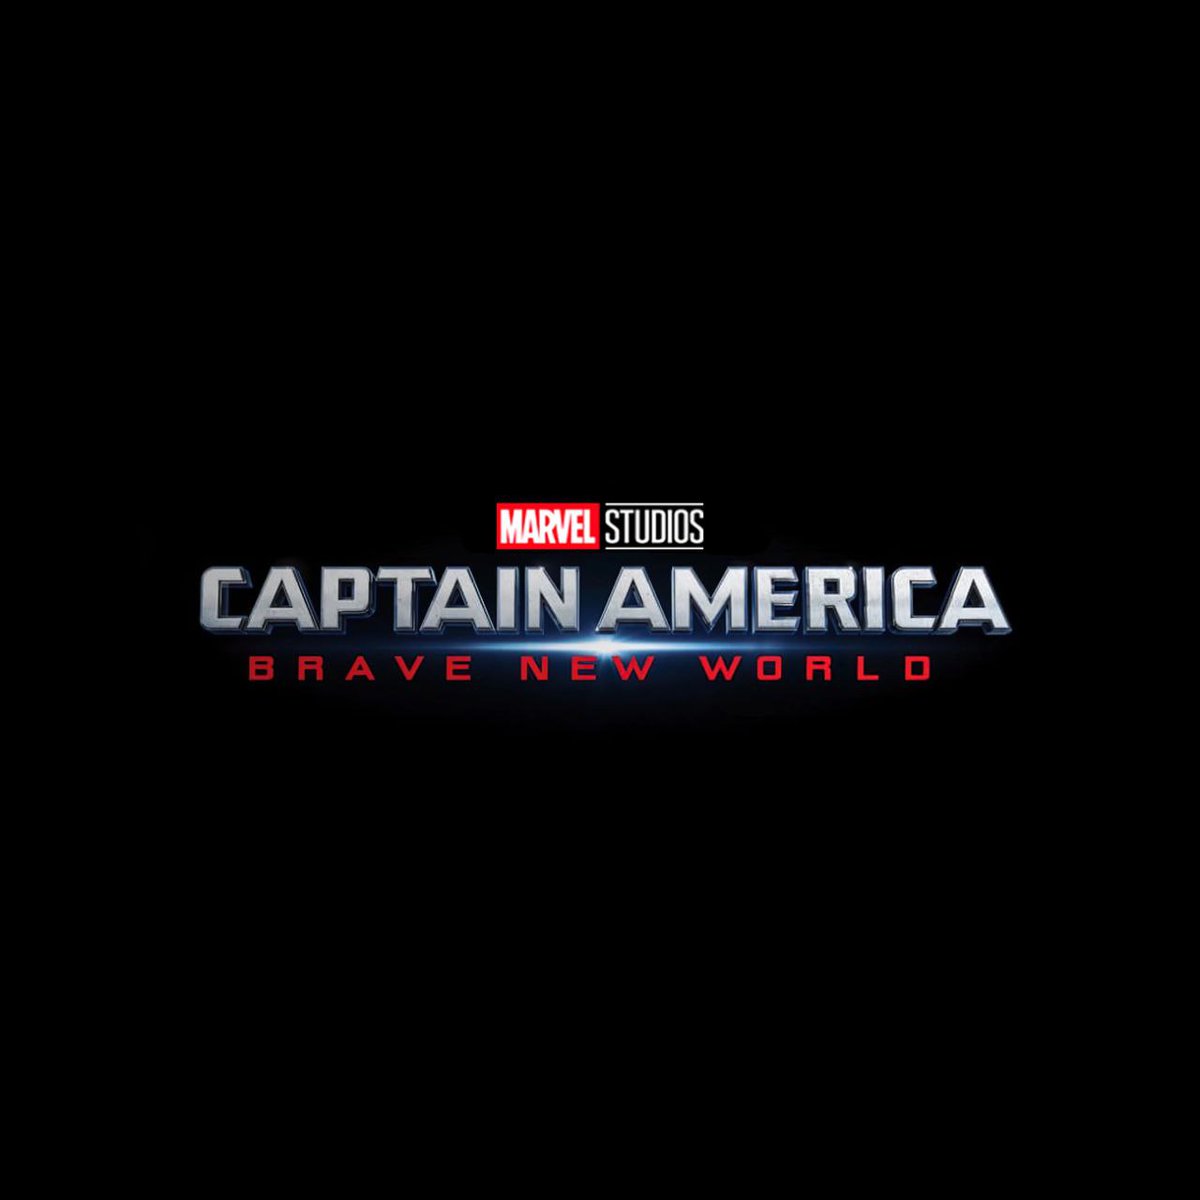 New details about 'CAPTAIN AMERICA: BRAVE NEW WORLD' will be released on May 9th.